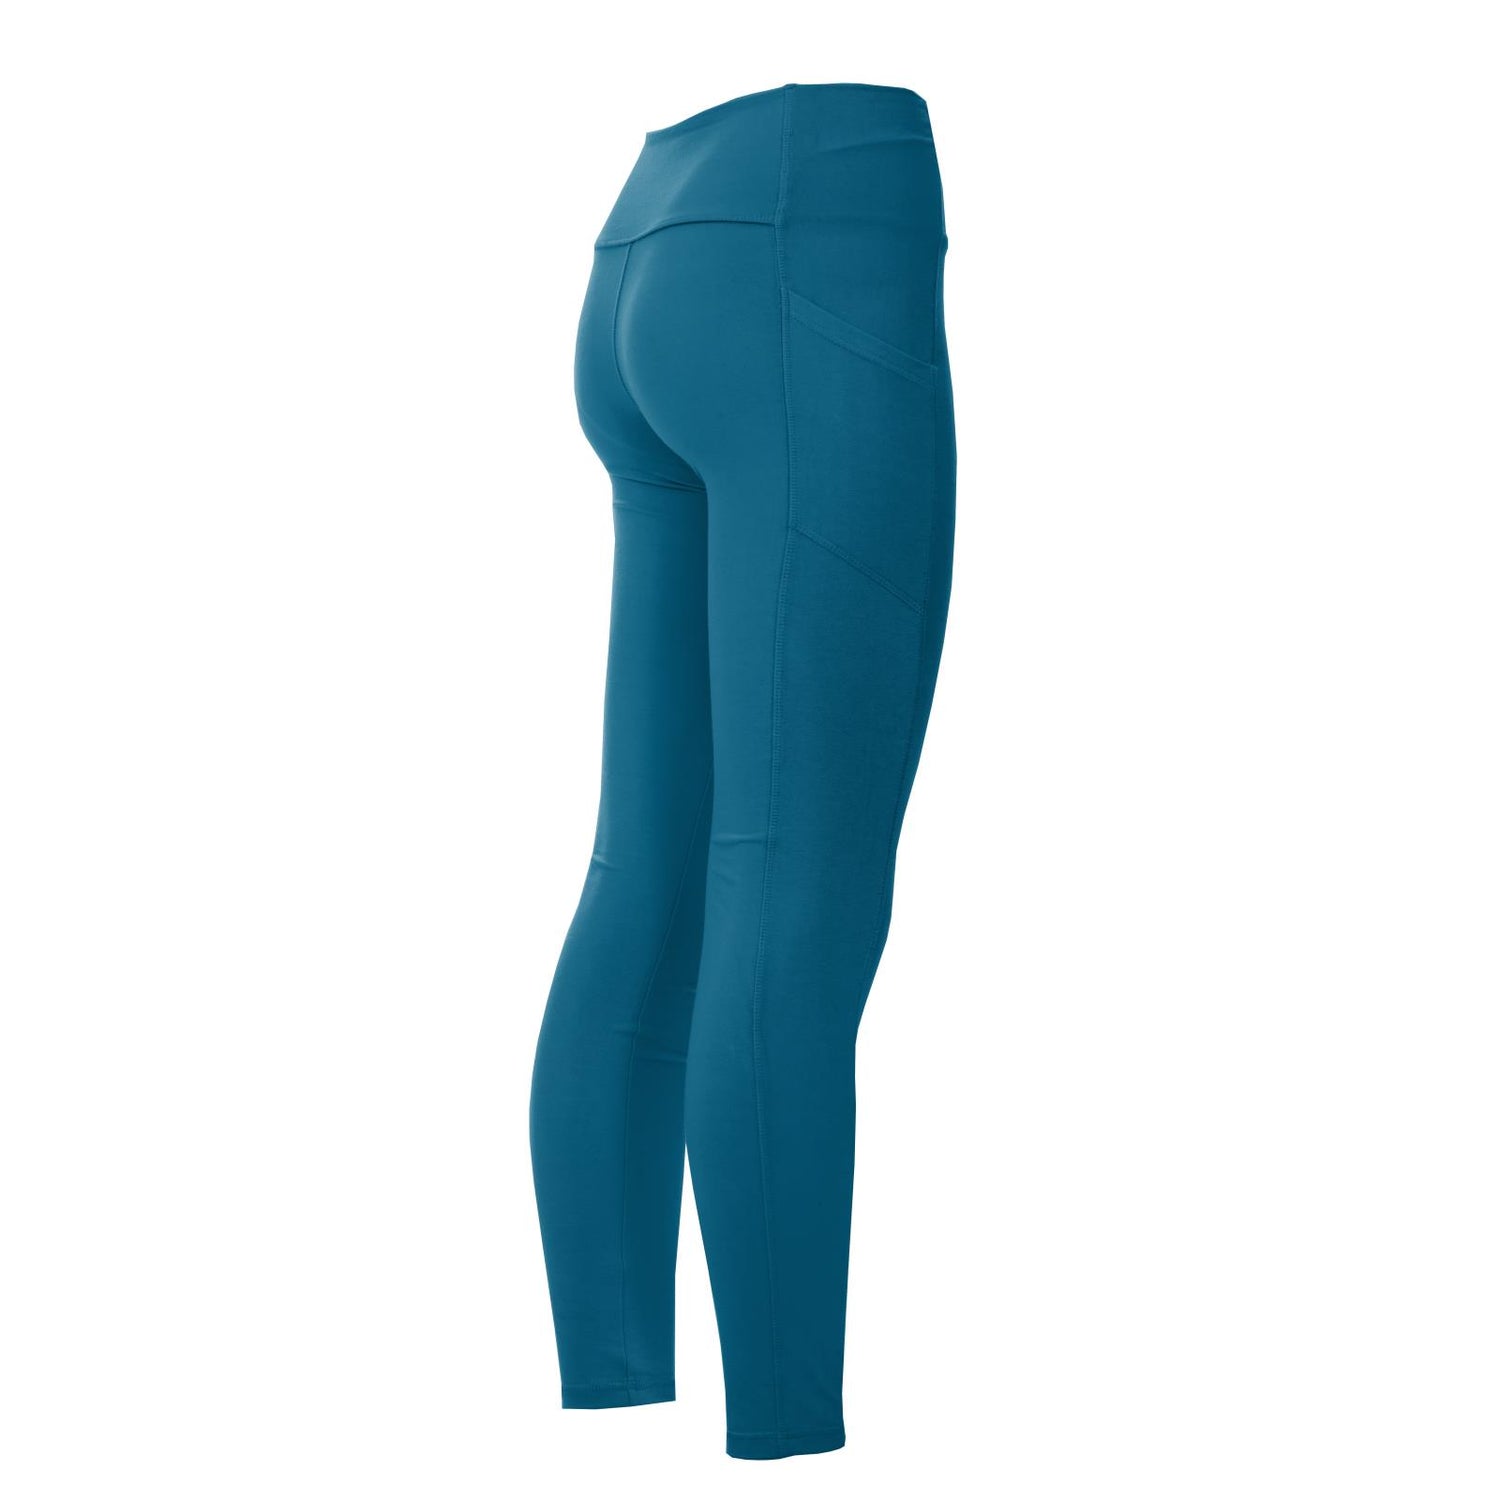 Women's Solid Luxe Stretch Leggings with Pockets in Seaport